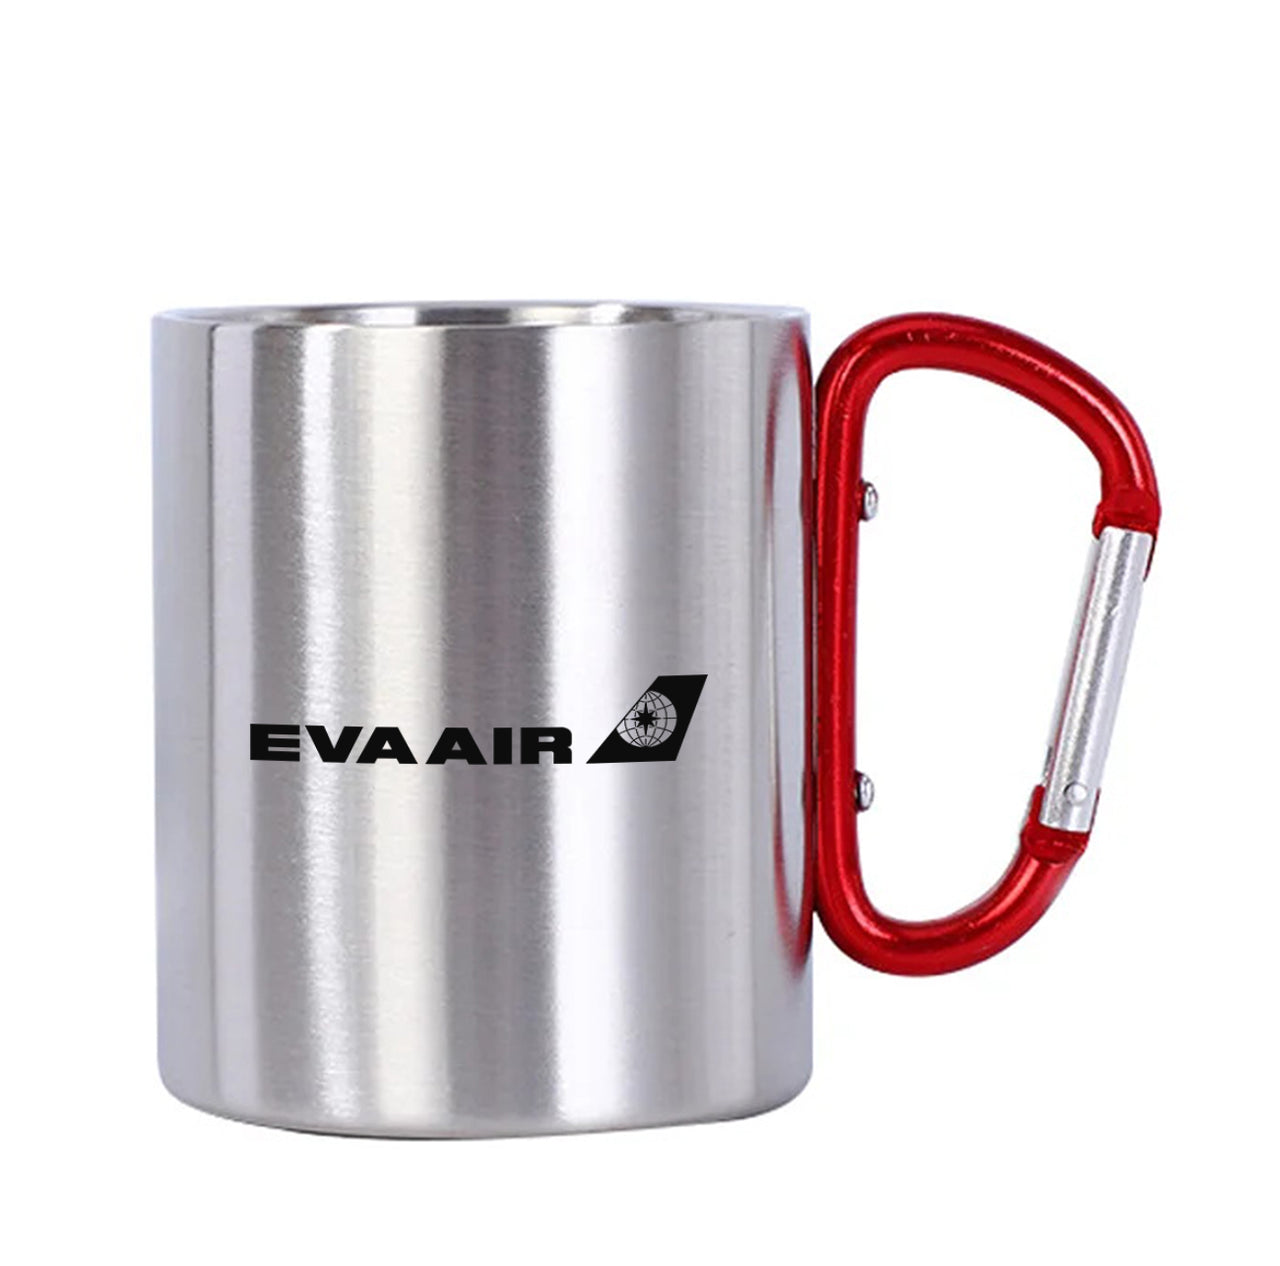 EVA Air Airlines(2) Designed Stainless Steel Outdoors Mugs